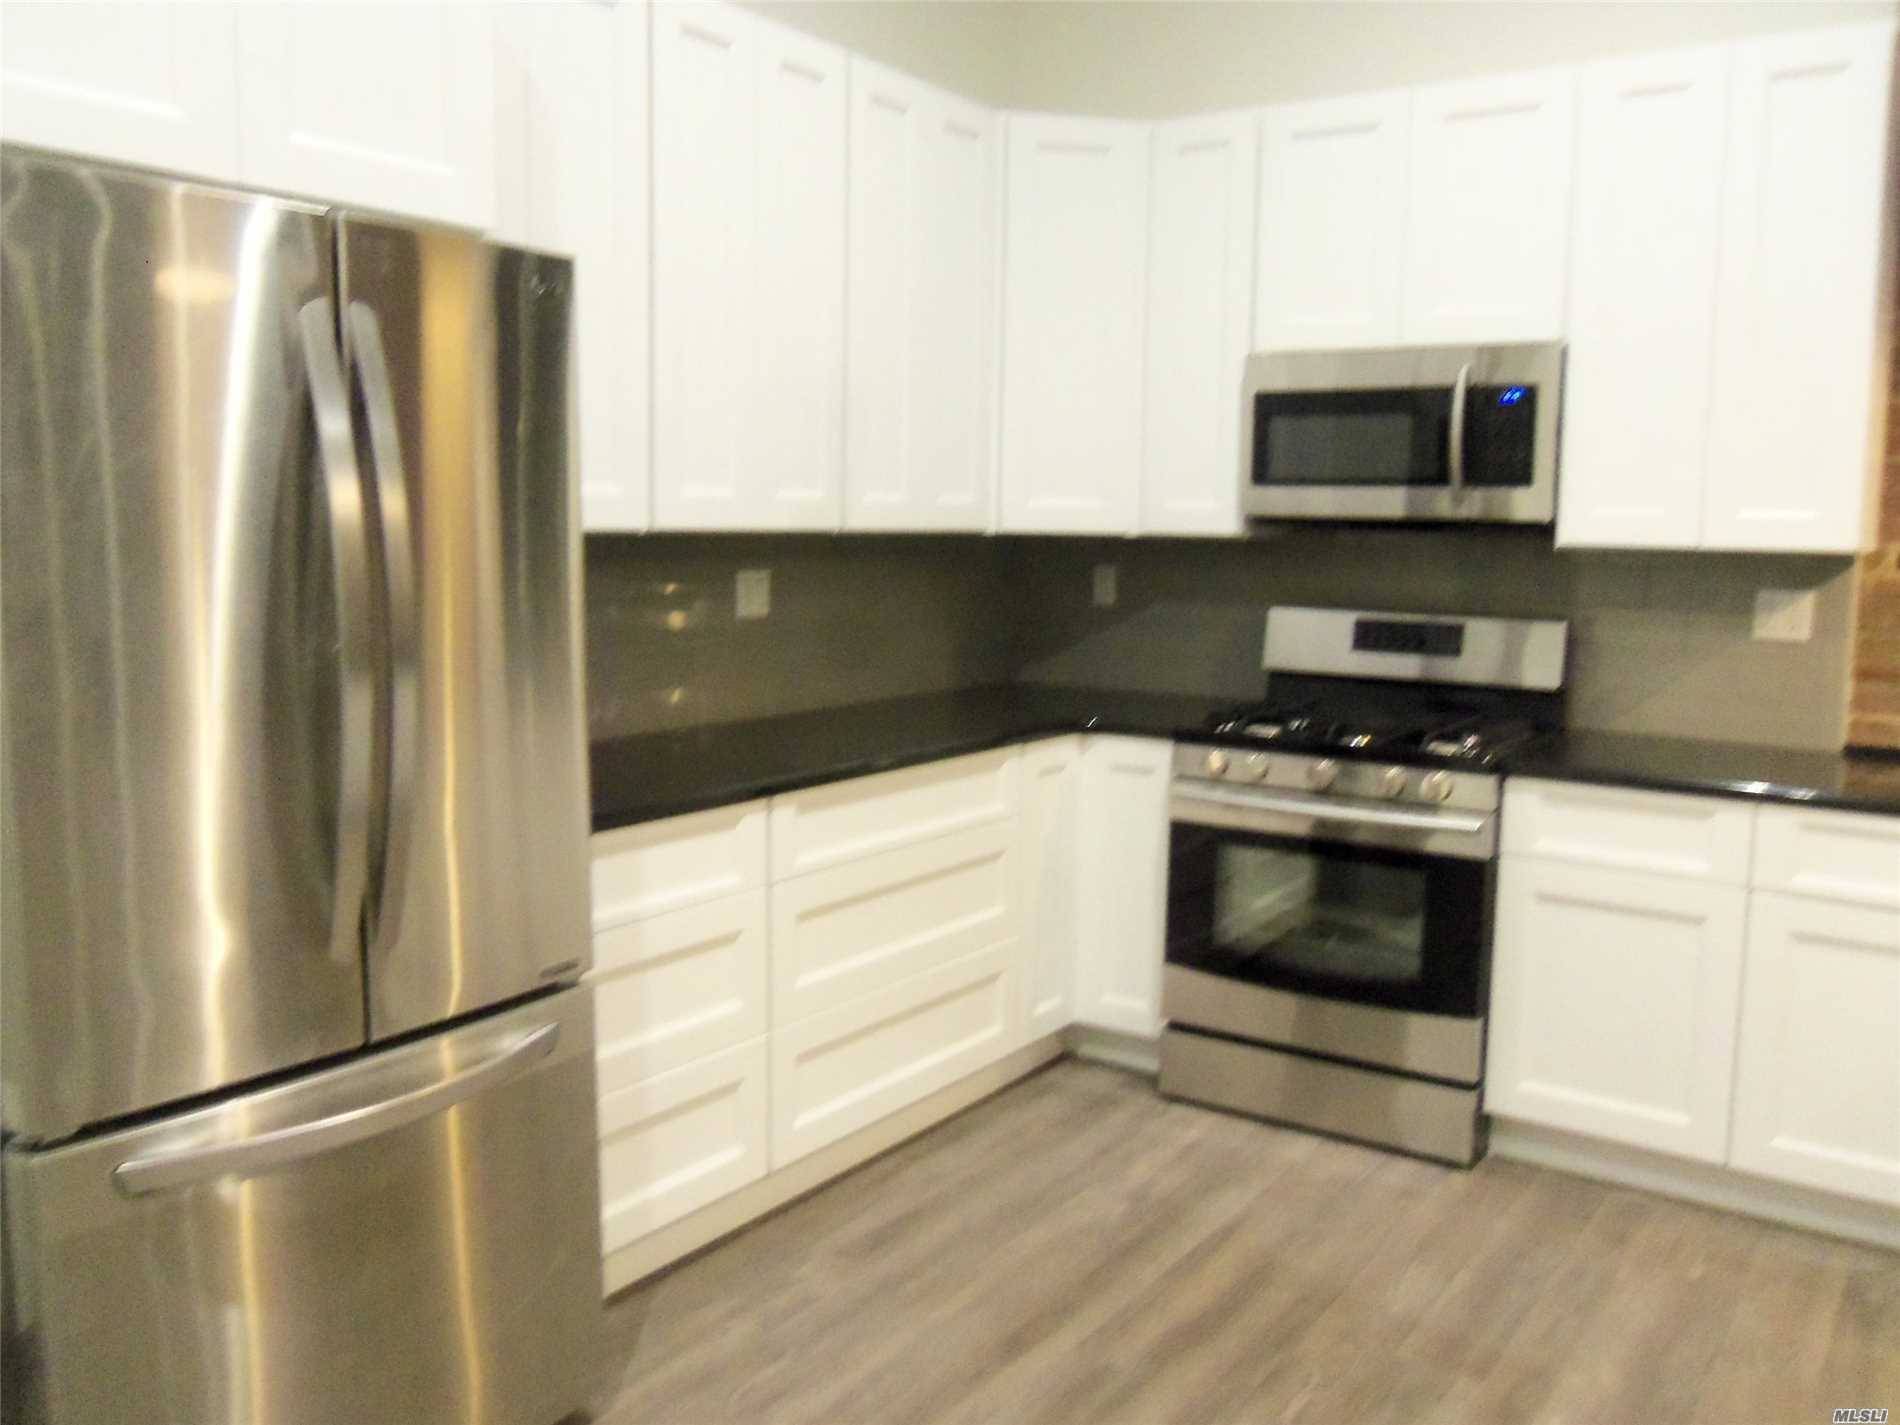 All New Luxury One Bedroom Apartment On Top Floor Of Newly Renovated Elevator Building On Sunrise Highway Across The Street From The Lirr Station.